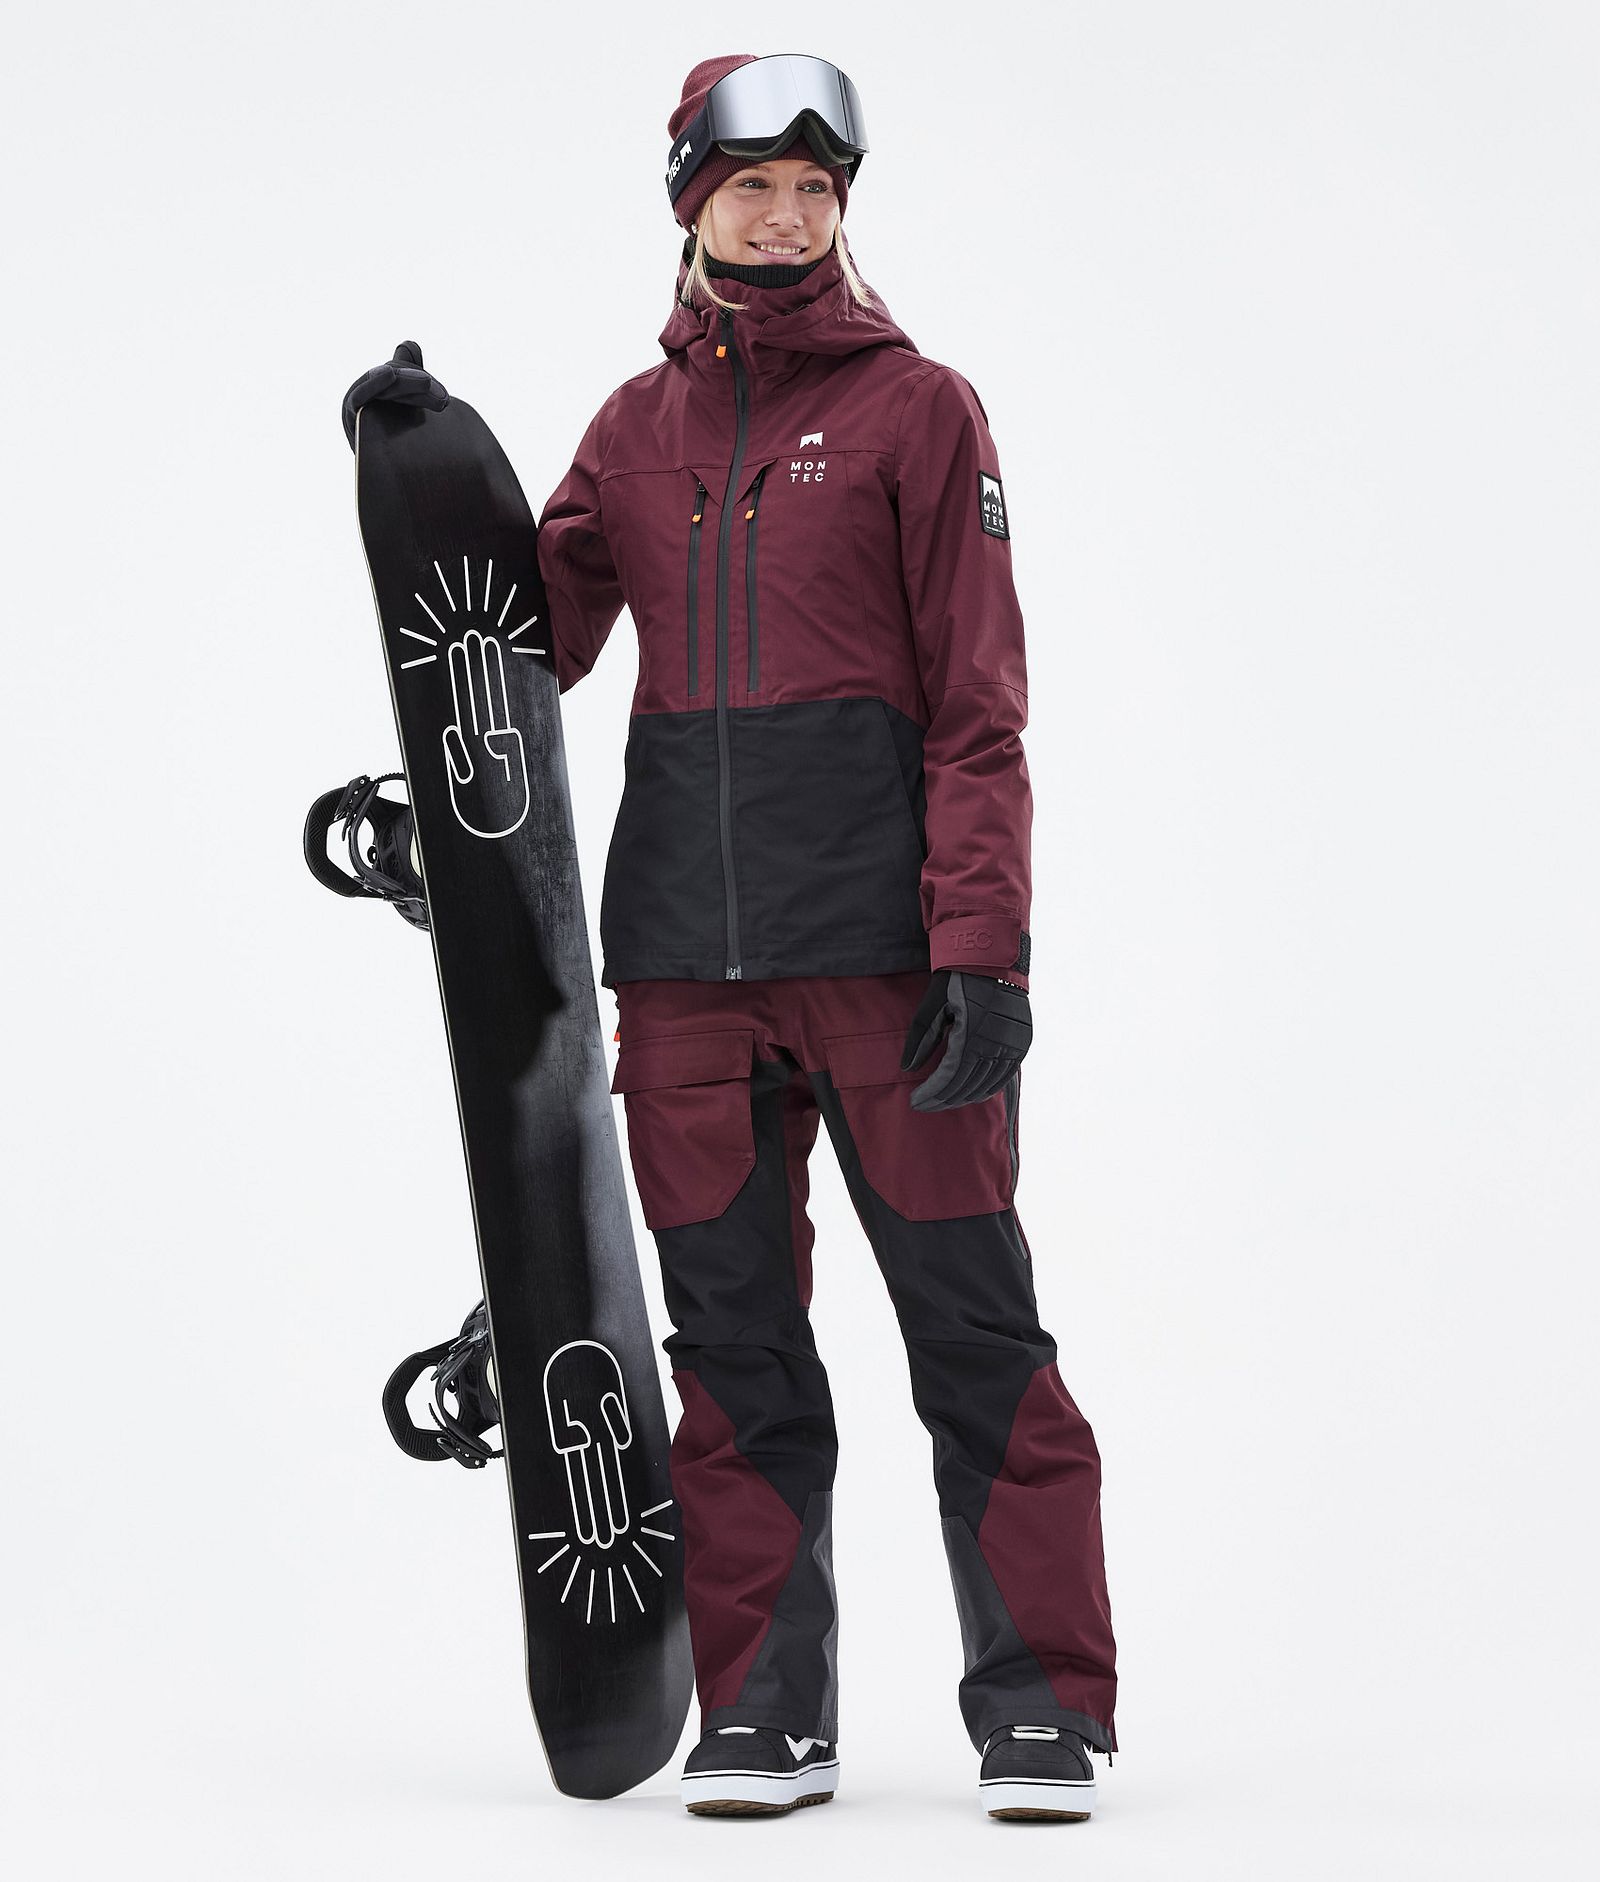 Moss W Outfit Snowboard Femme Burgundy/Black, Image 1 of 2